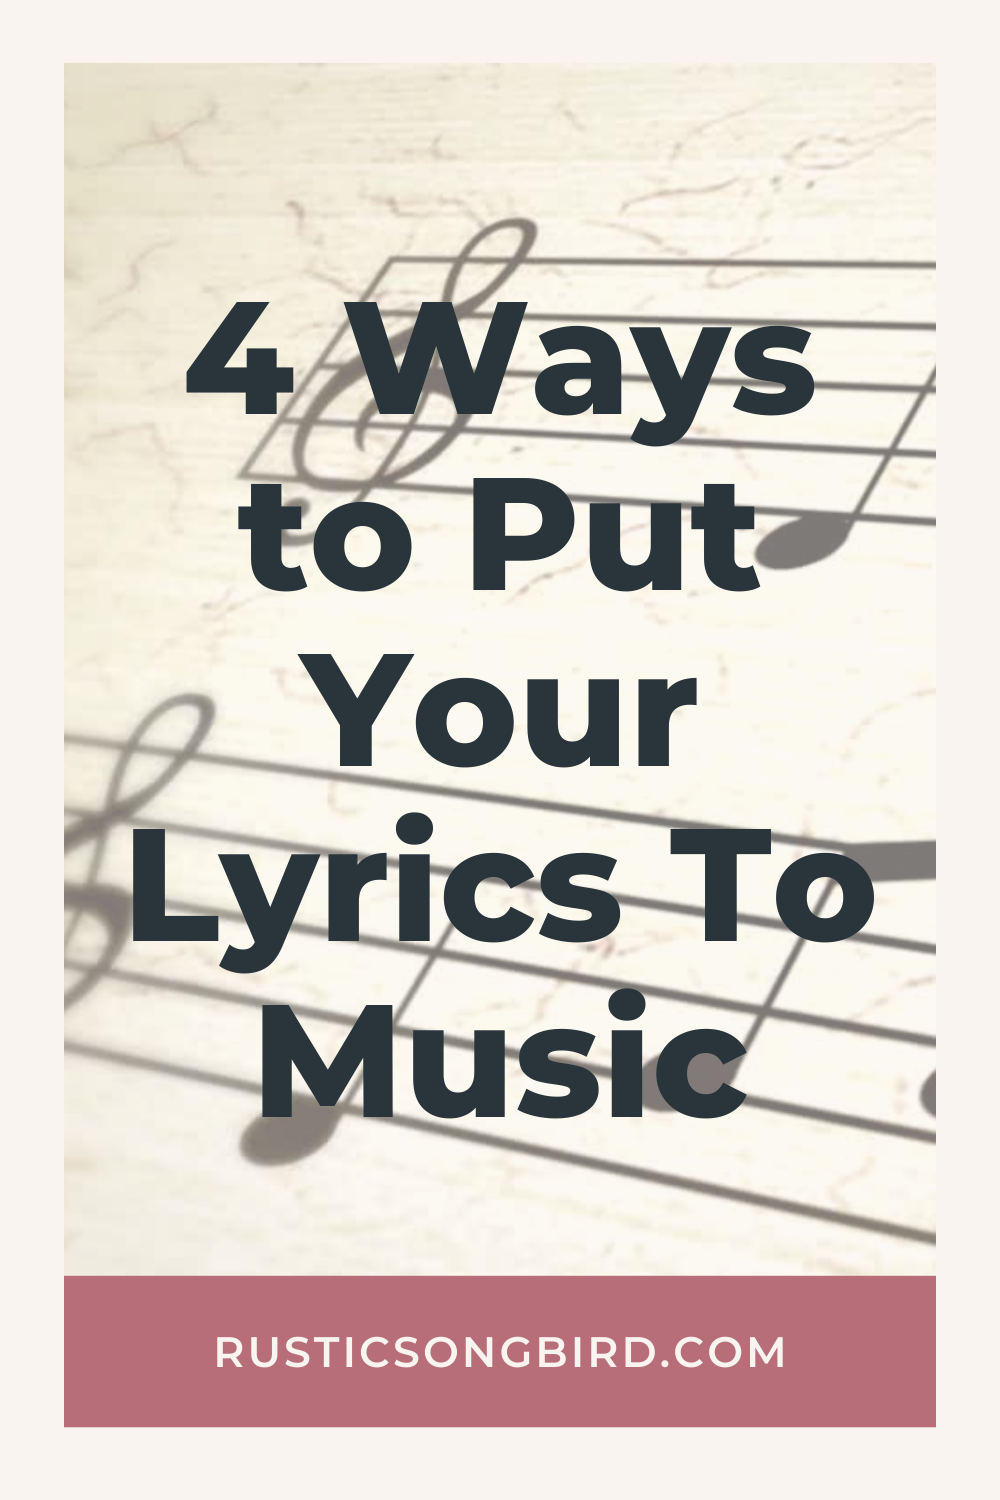 sheet music background with title of blog post text, "4 ways to put your lyrics to music"